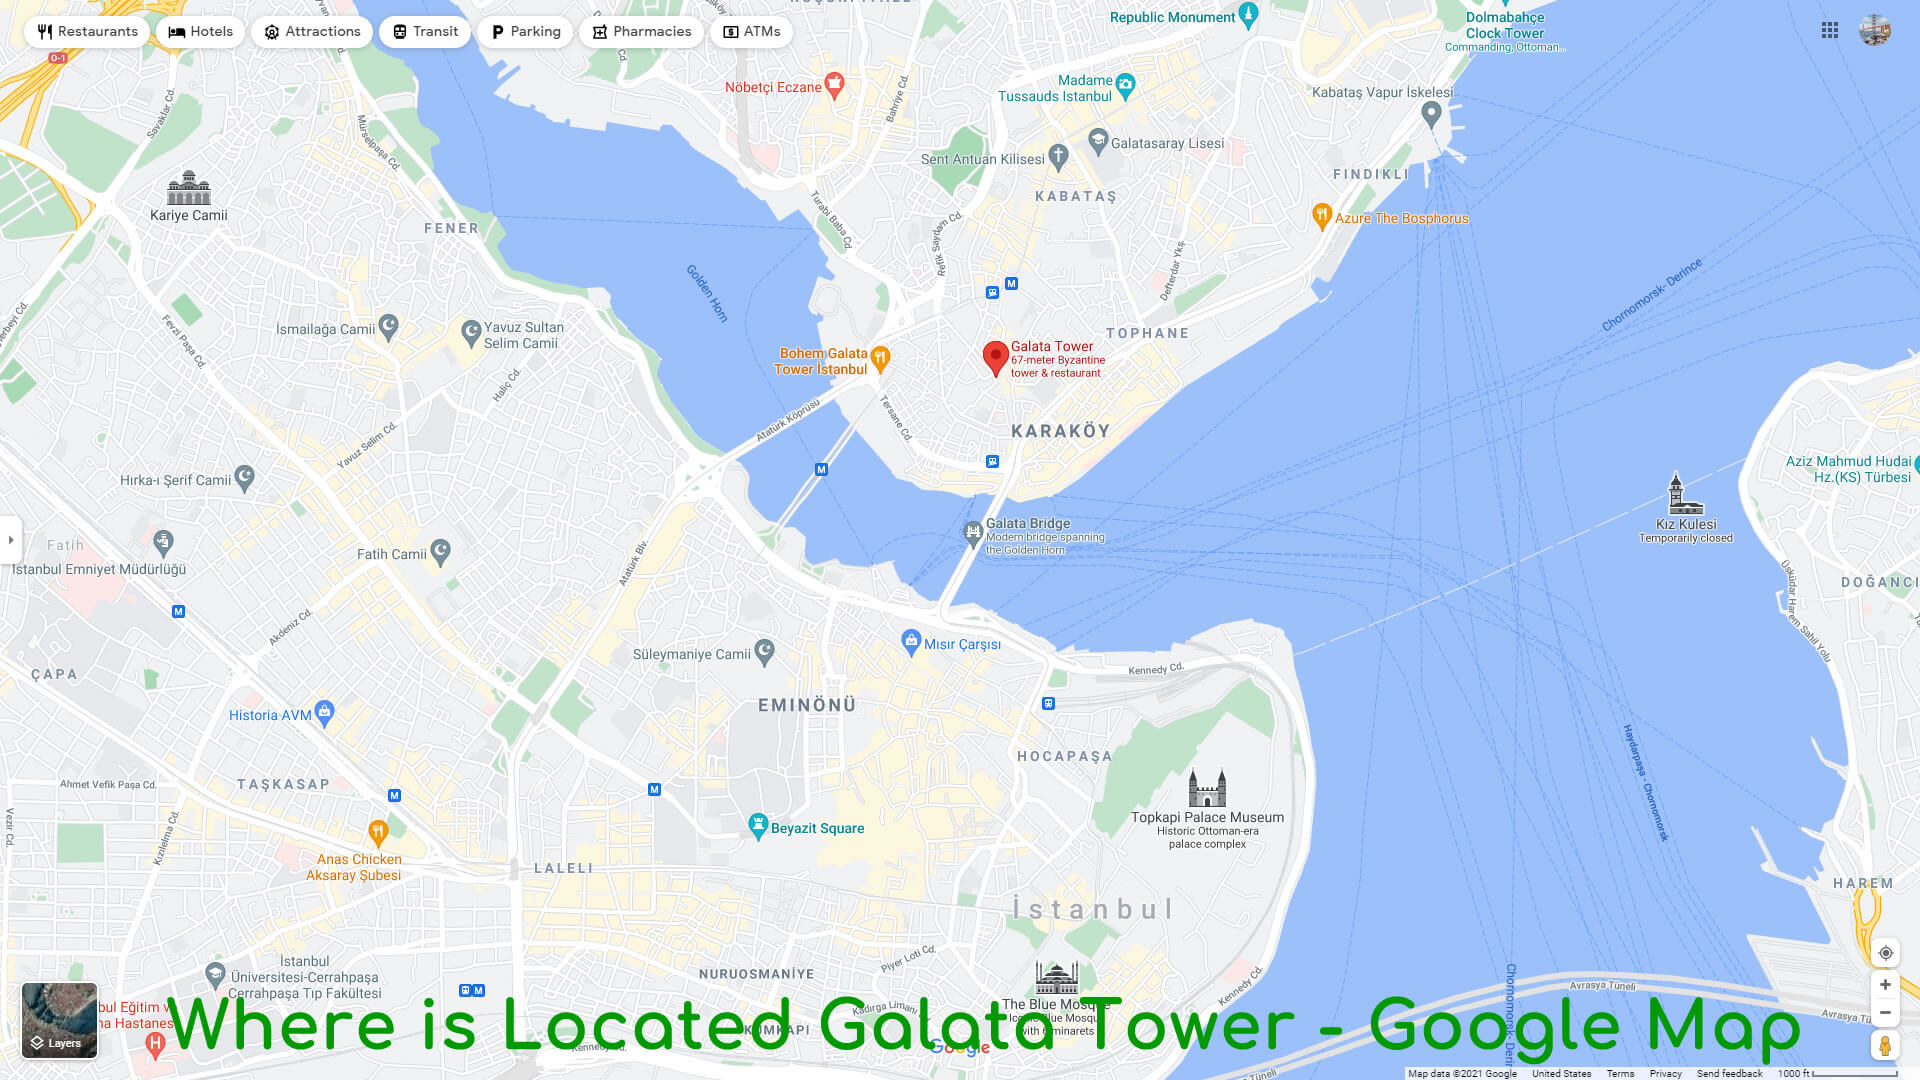 Where is Located Galata Tower - Google Map